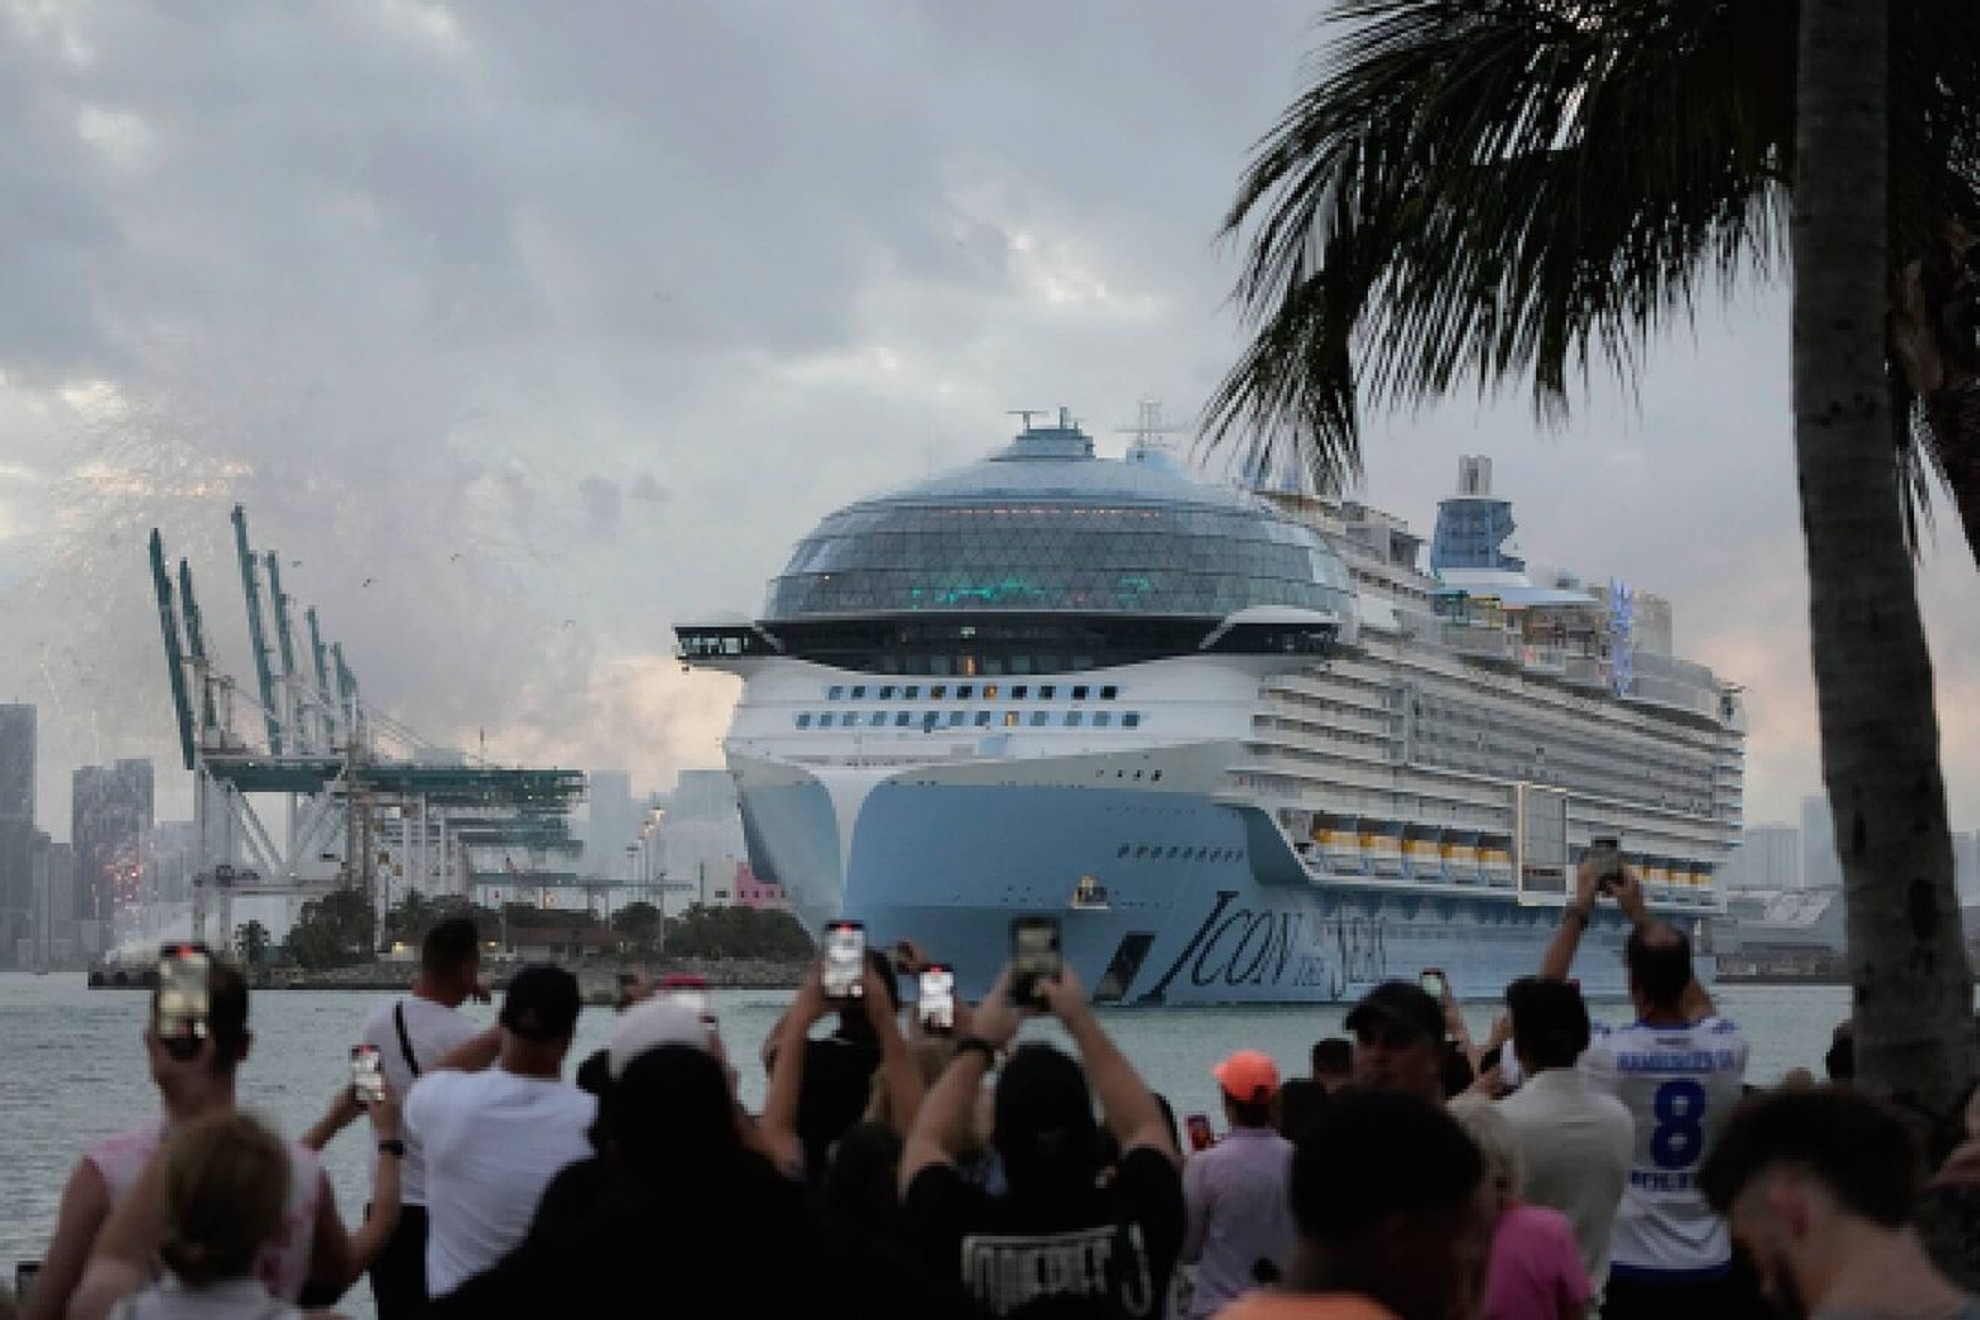 Worlds largest cruise ship begins its voyage in Miami